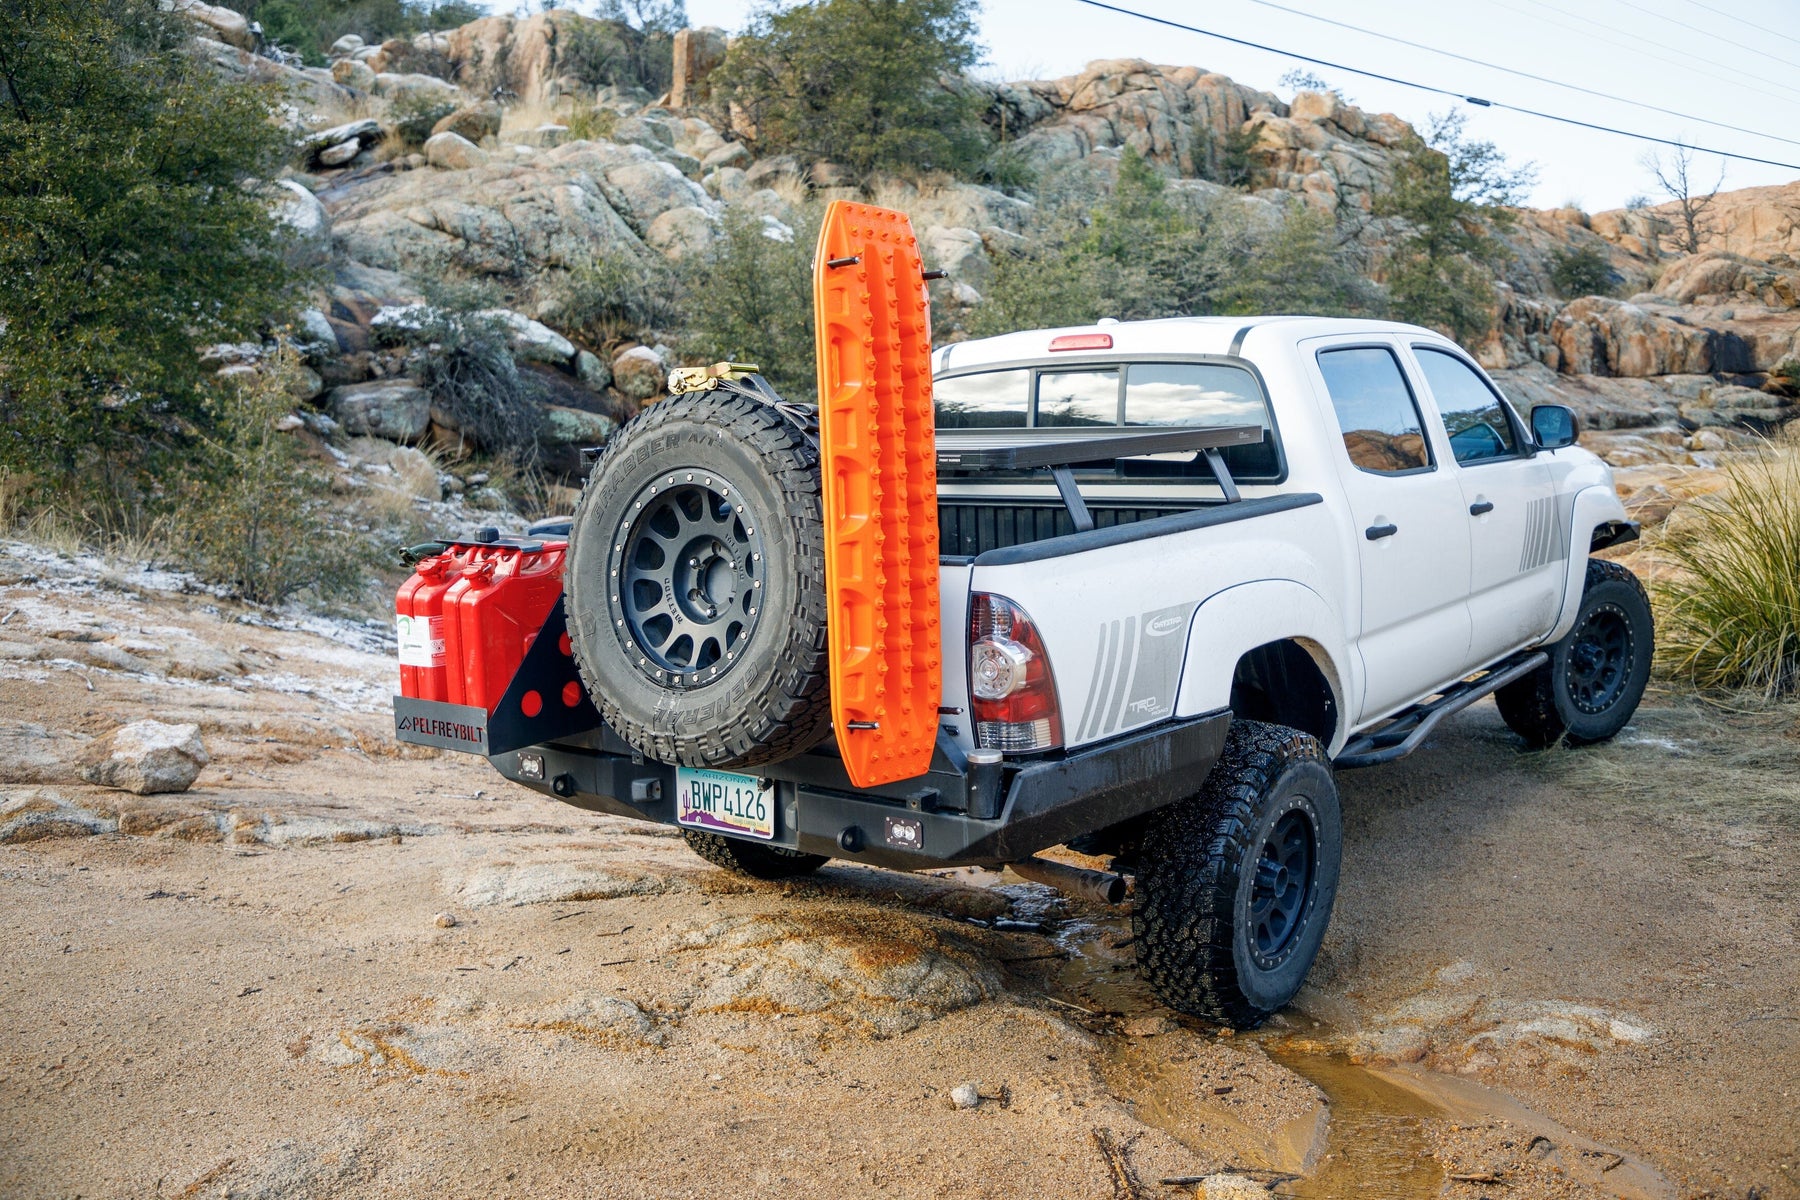 Overland Kitted Spare Tire MAXTRAX Mounting System  Mounting Gear Overland Kitted- Overland Kitted